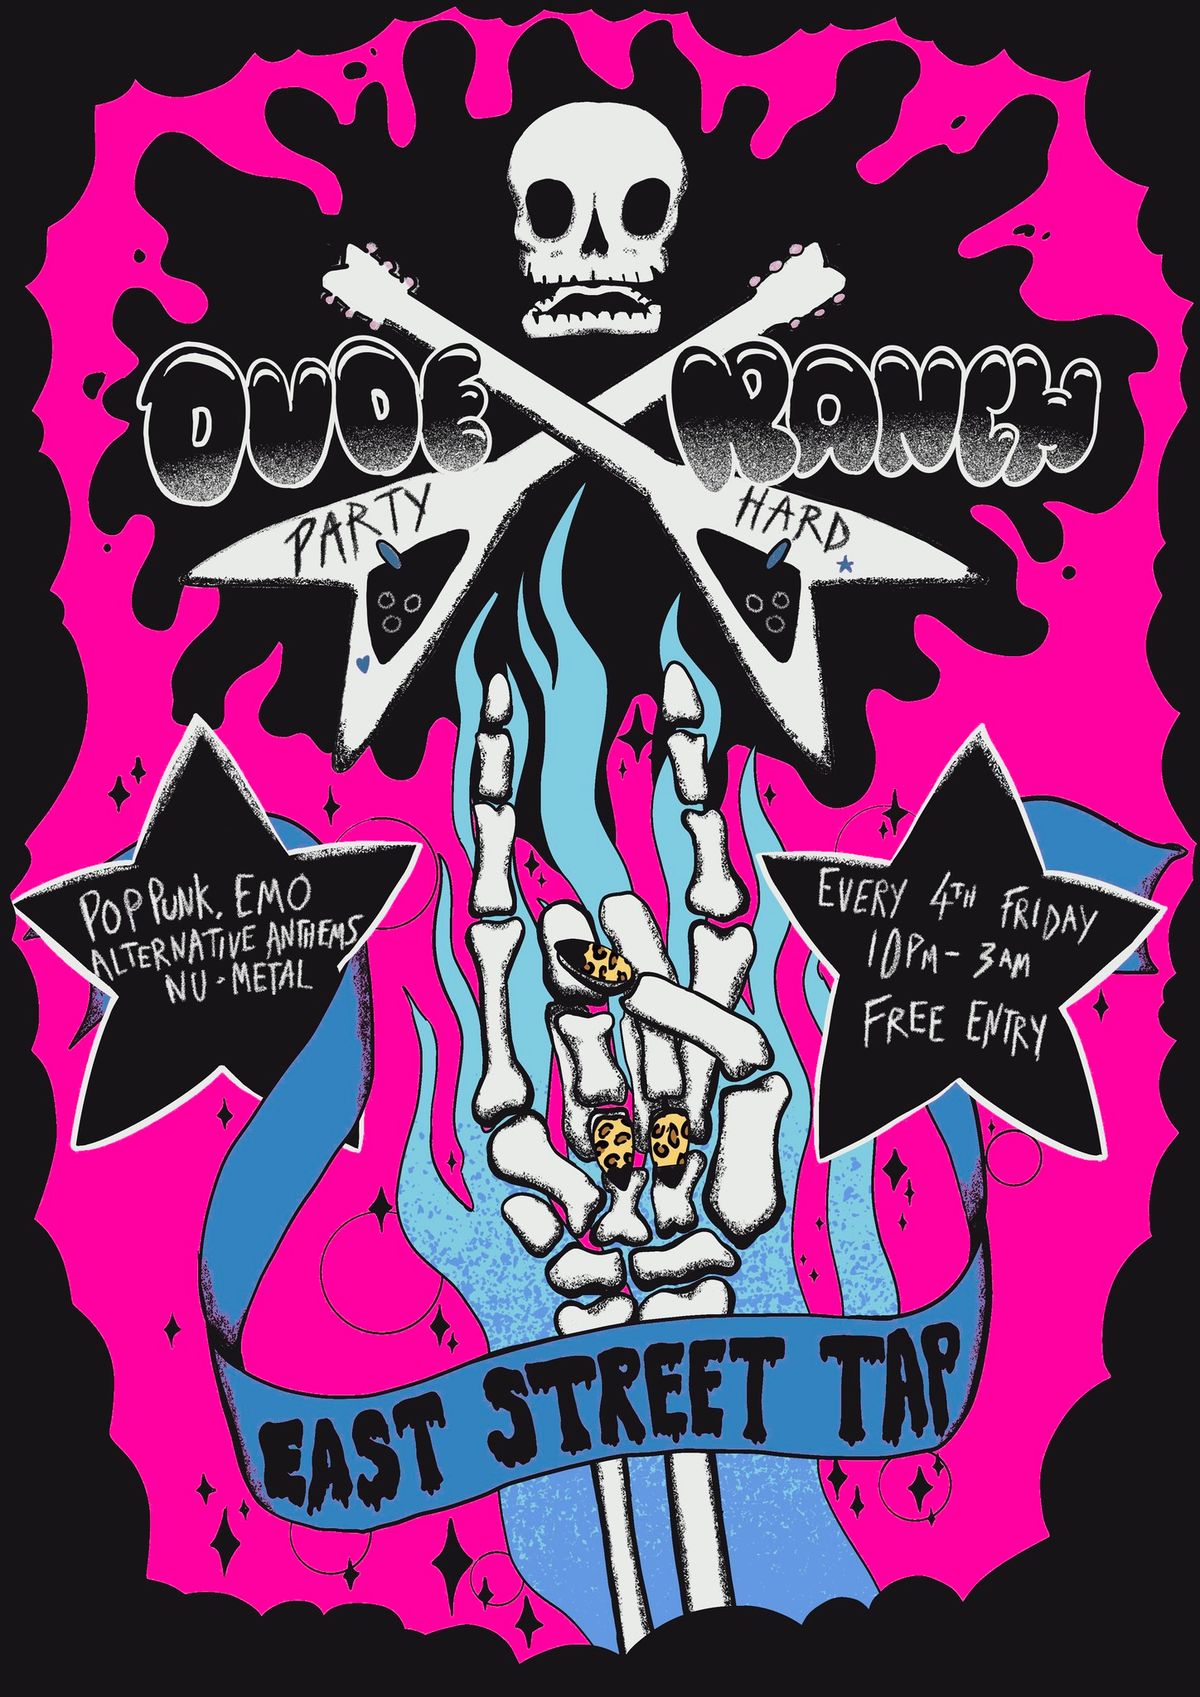 DUDE RANCH \\m\/ FRIDAY APRIL 26TH AT EAST STREET TAP 